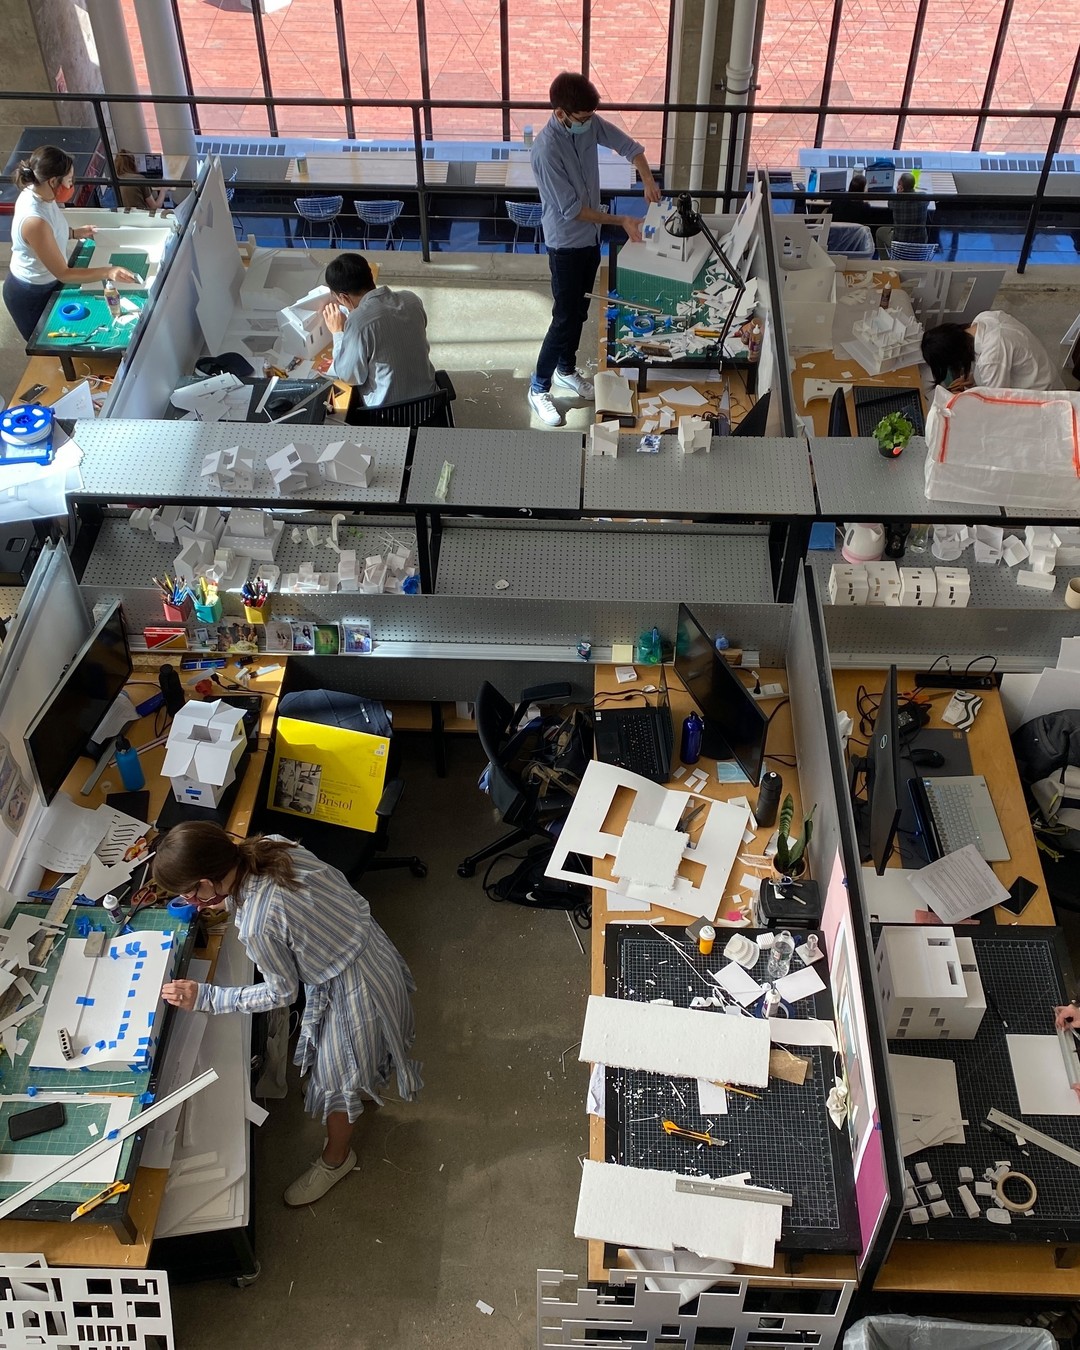 Students seen from above working at messy desks.